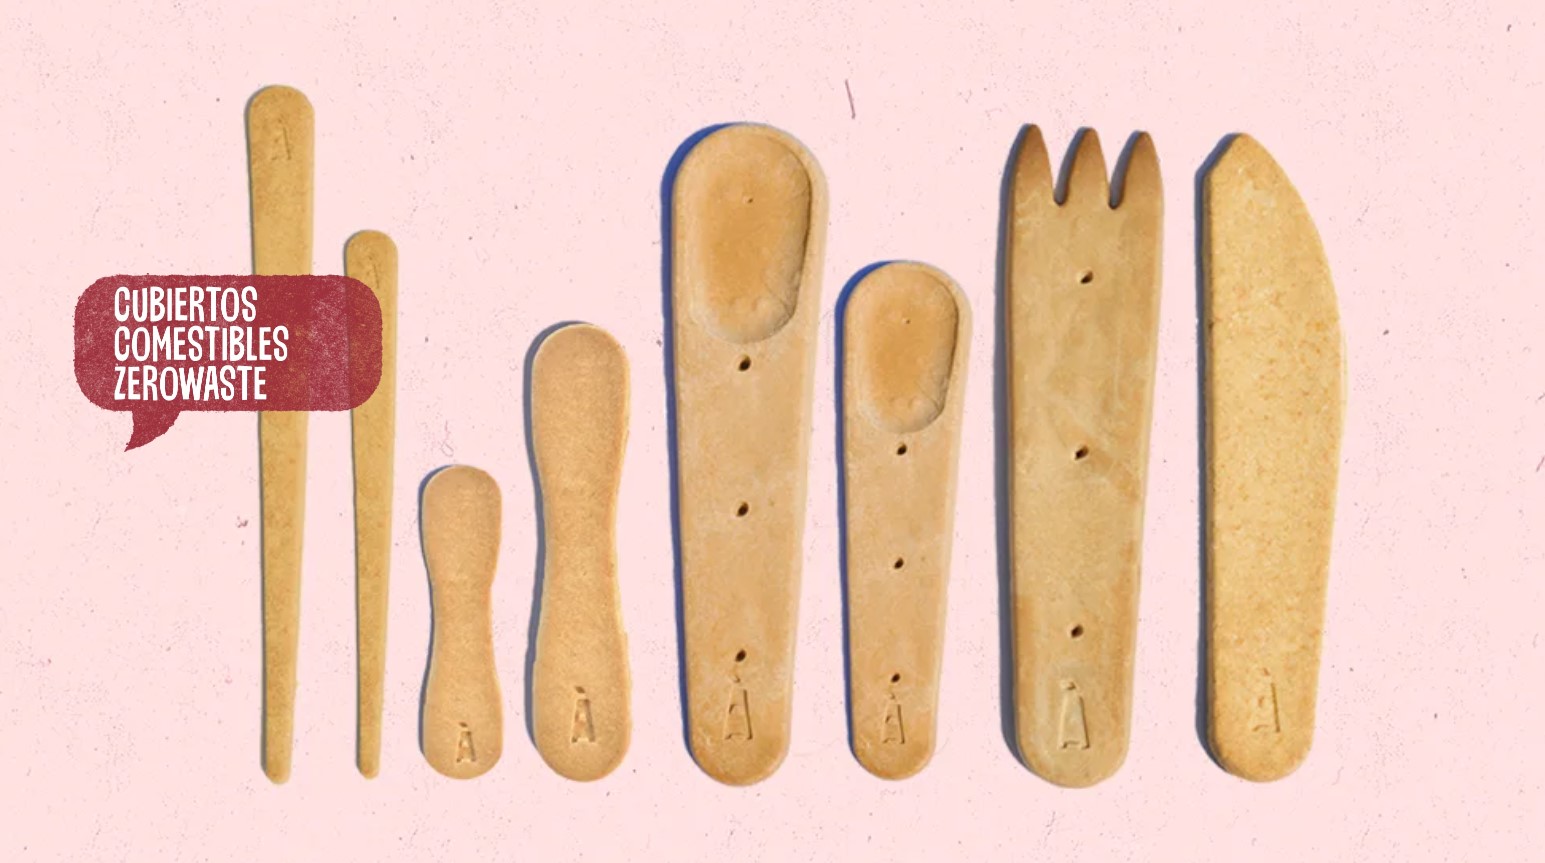 Different models of edible cutlery